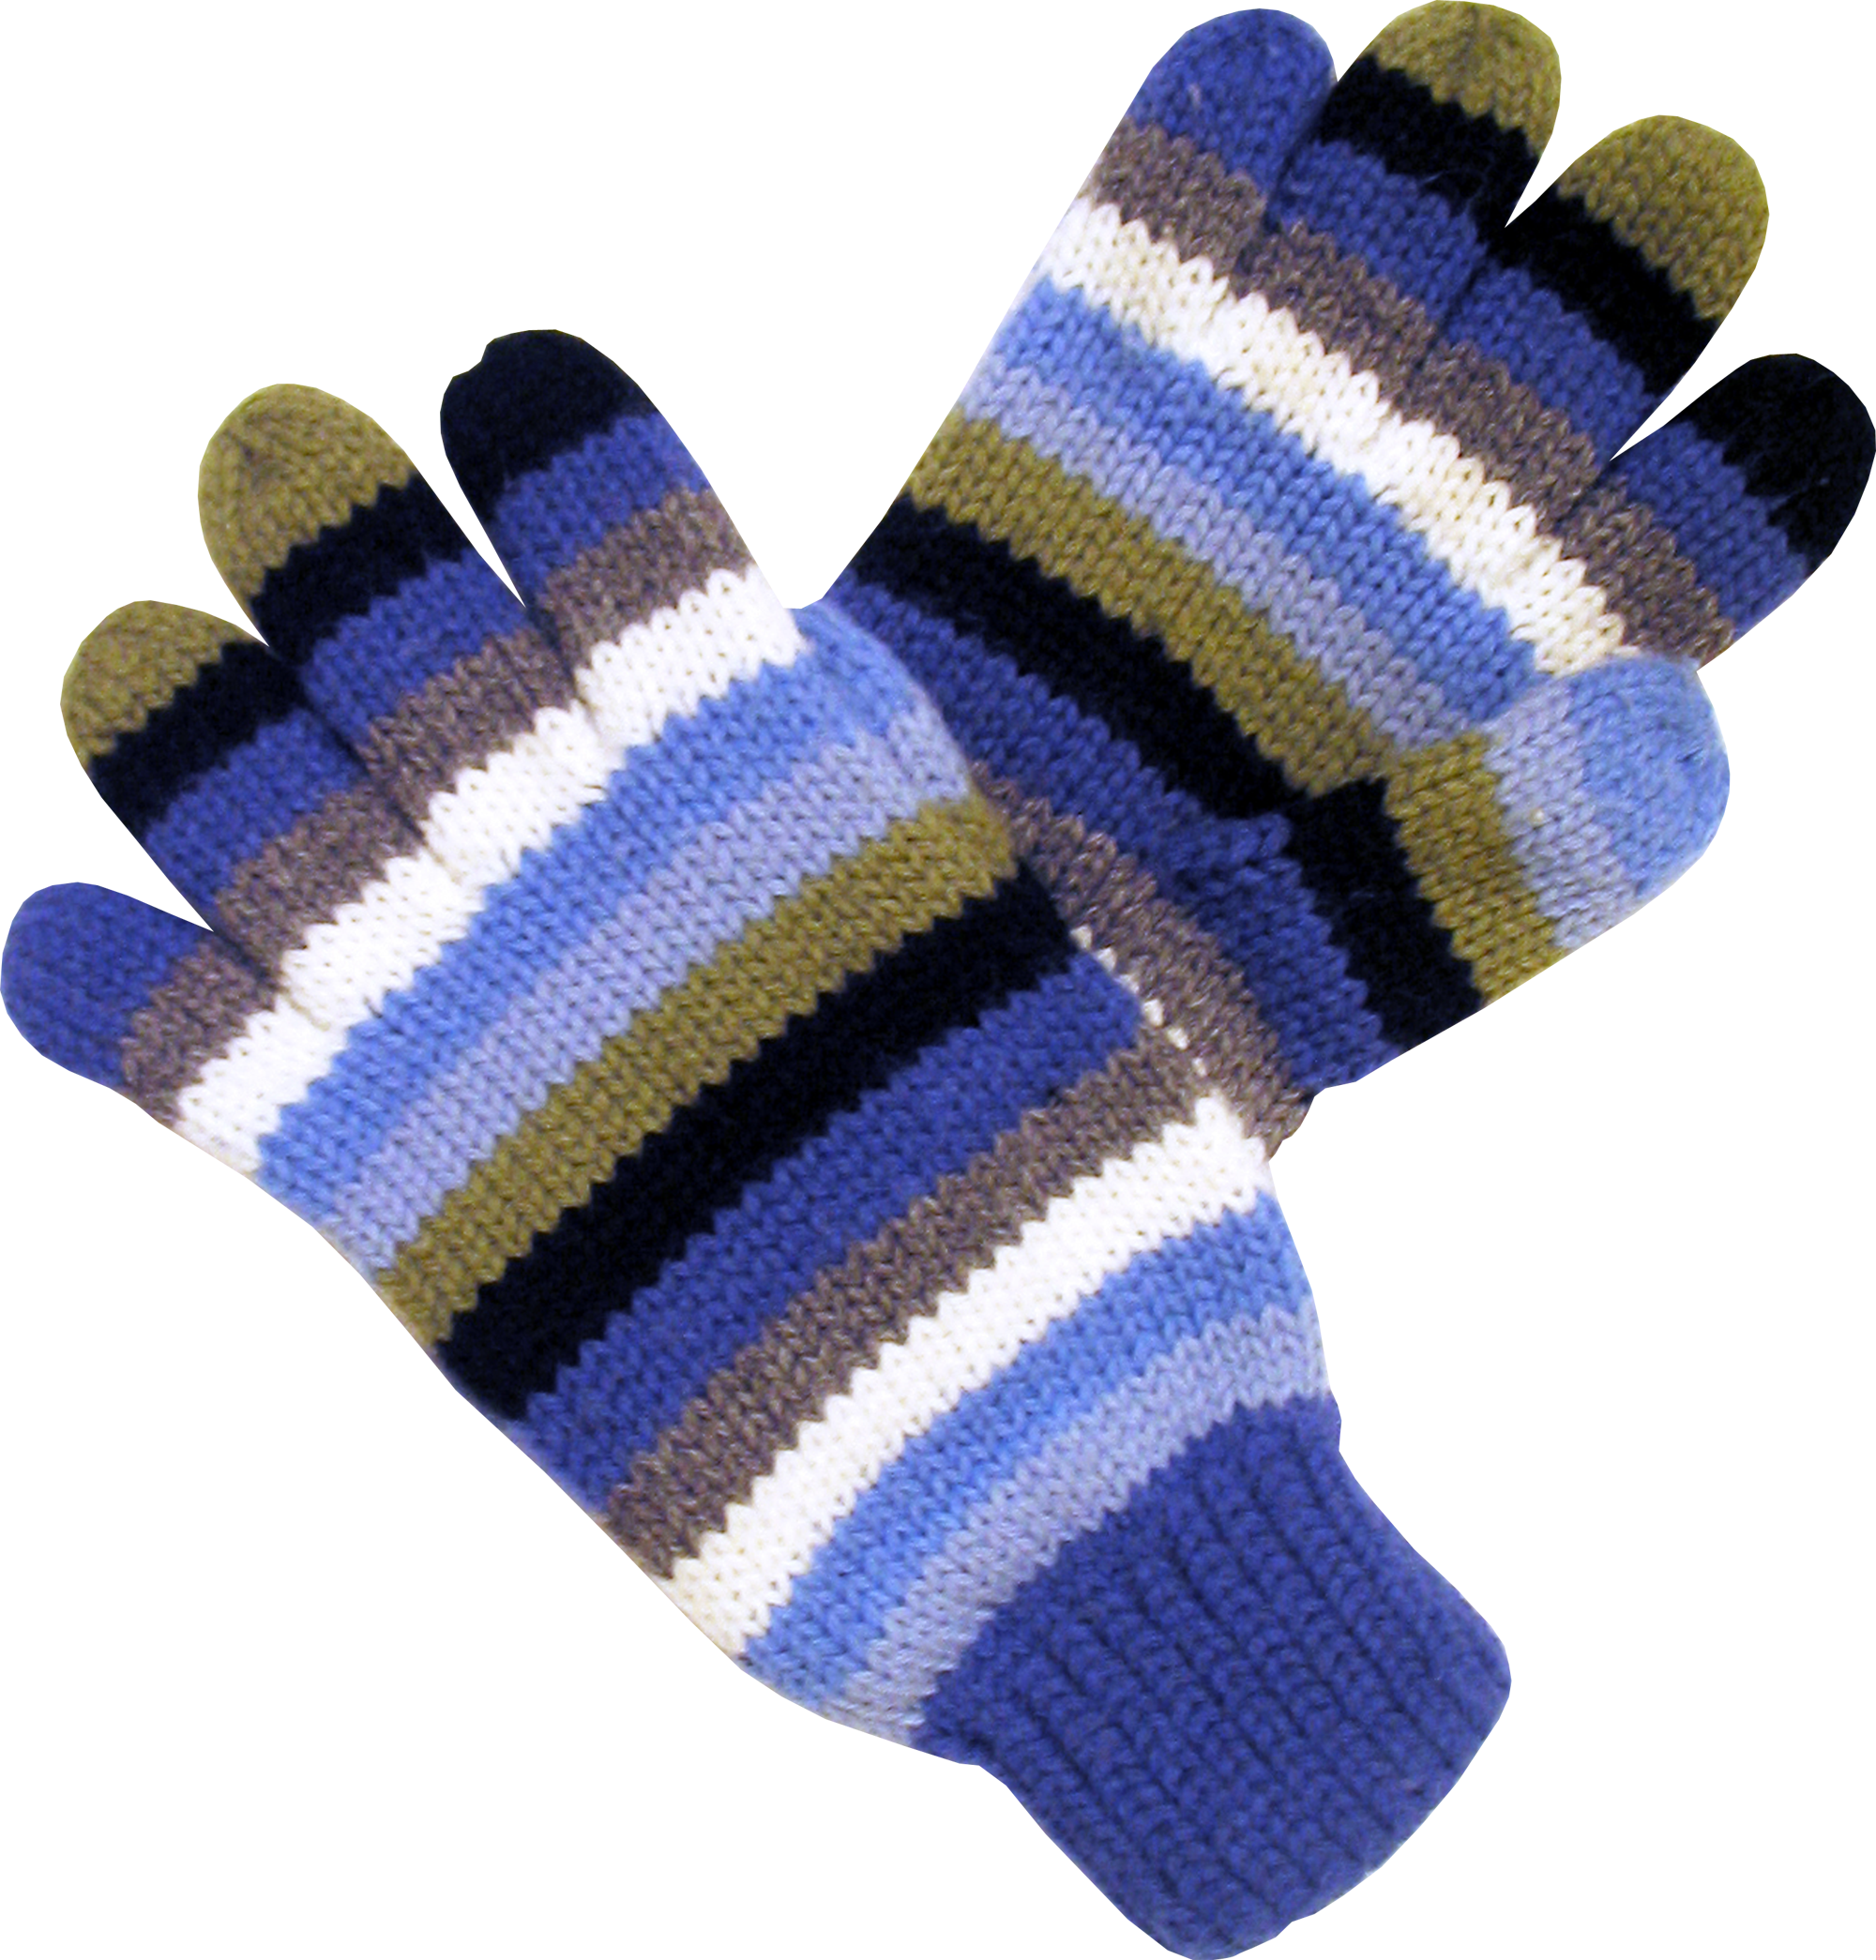 Glove on hand PNG image